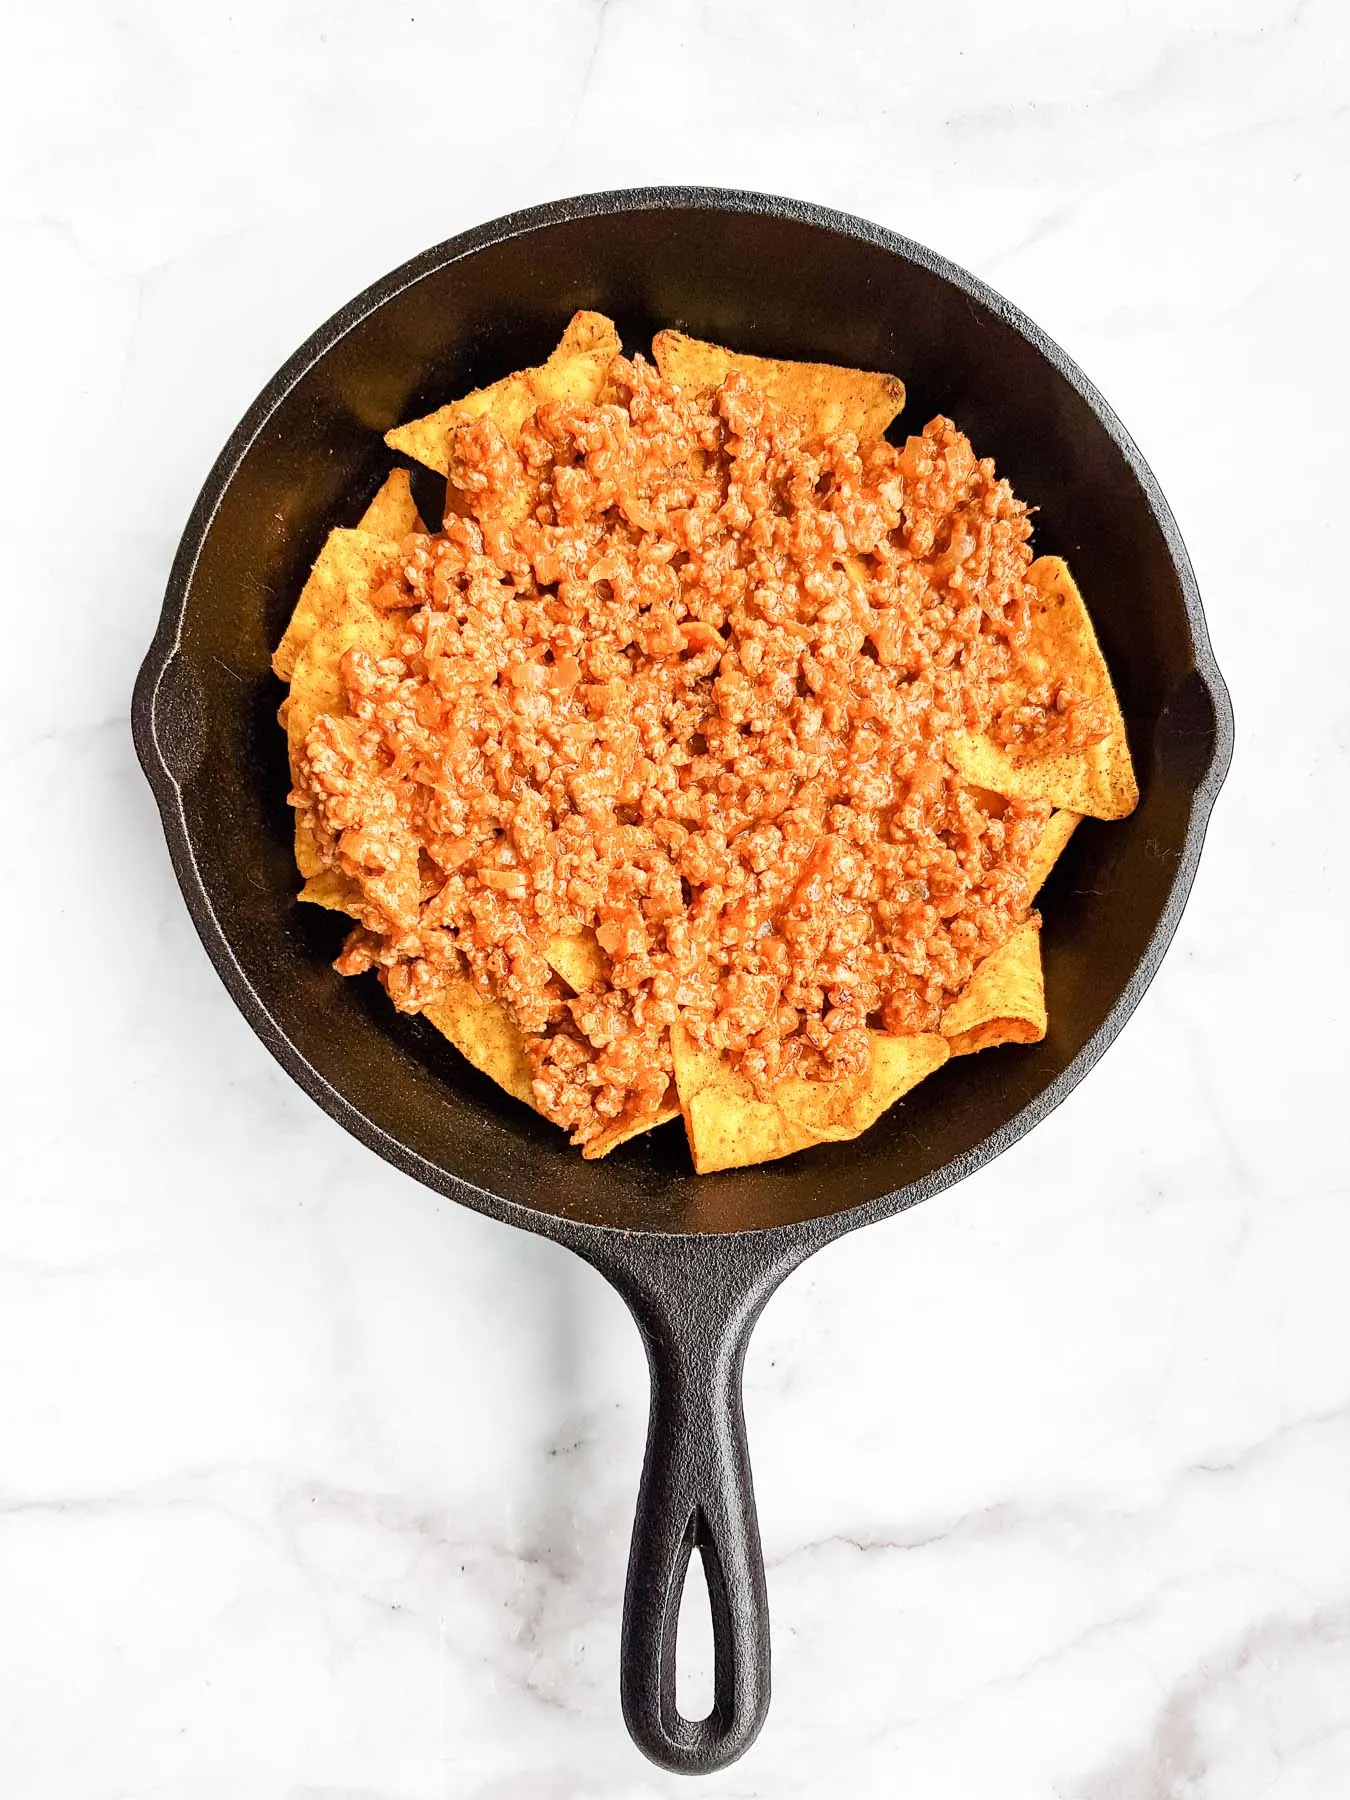 tortilla chips topped with cooked ground beef in a skilet